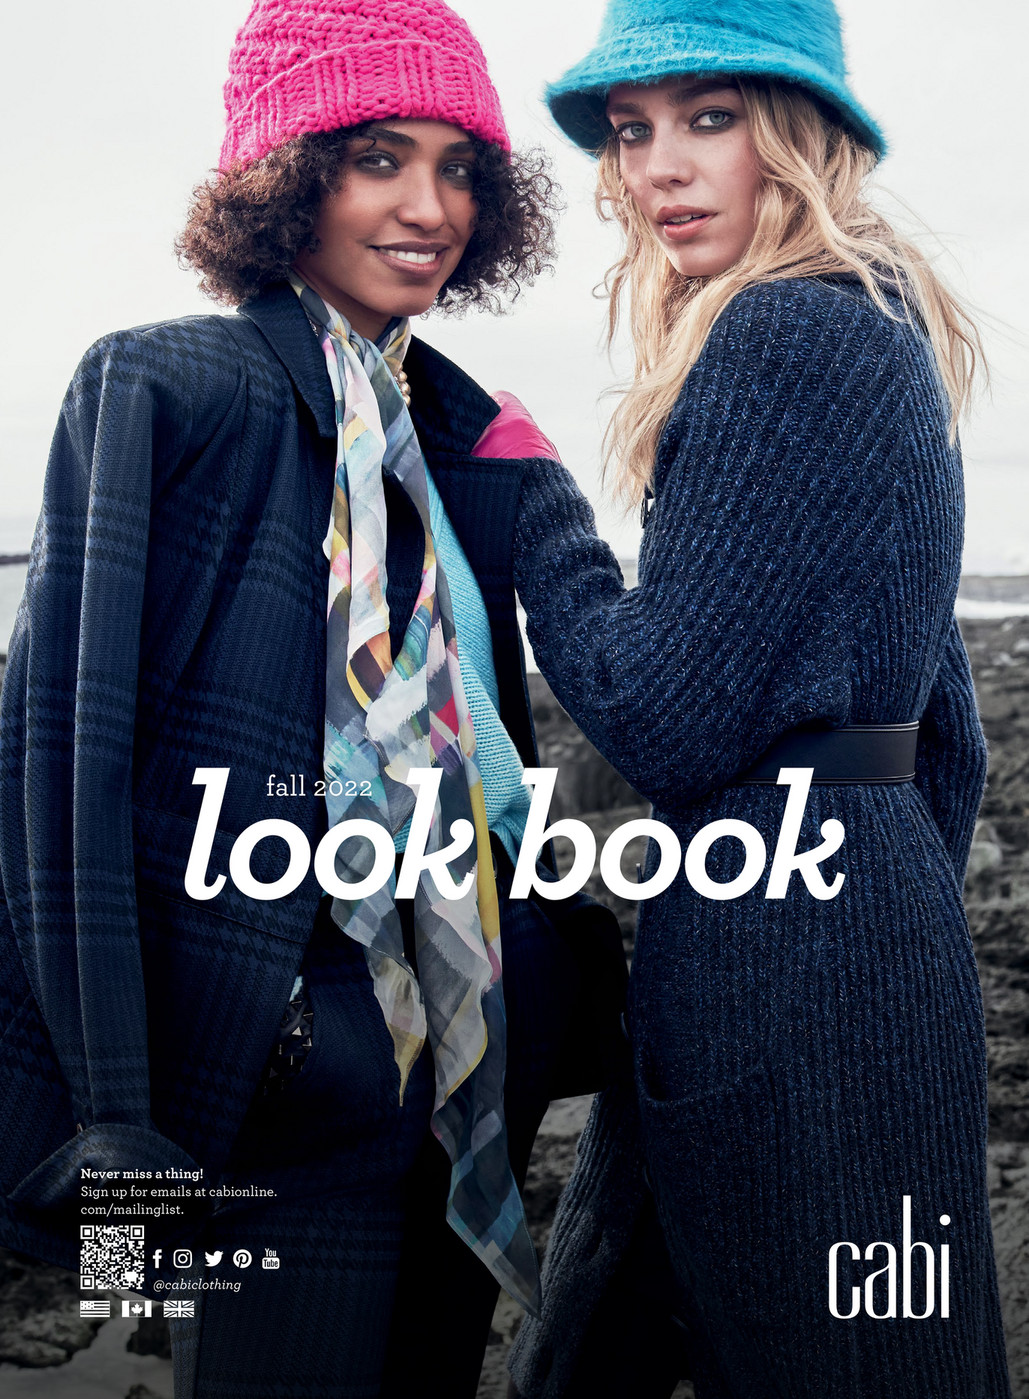 Cabi - Fall 2022 Look Book - Page 8-9